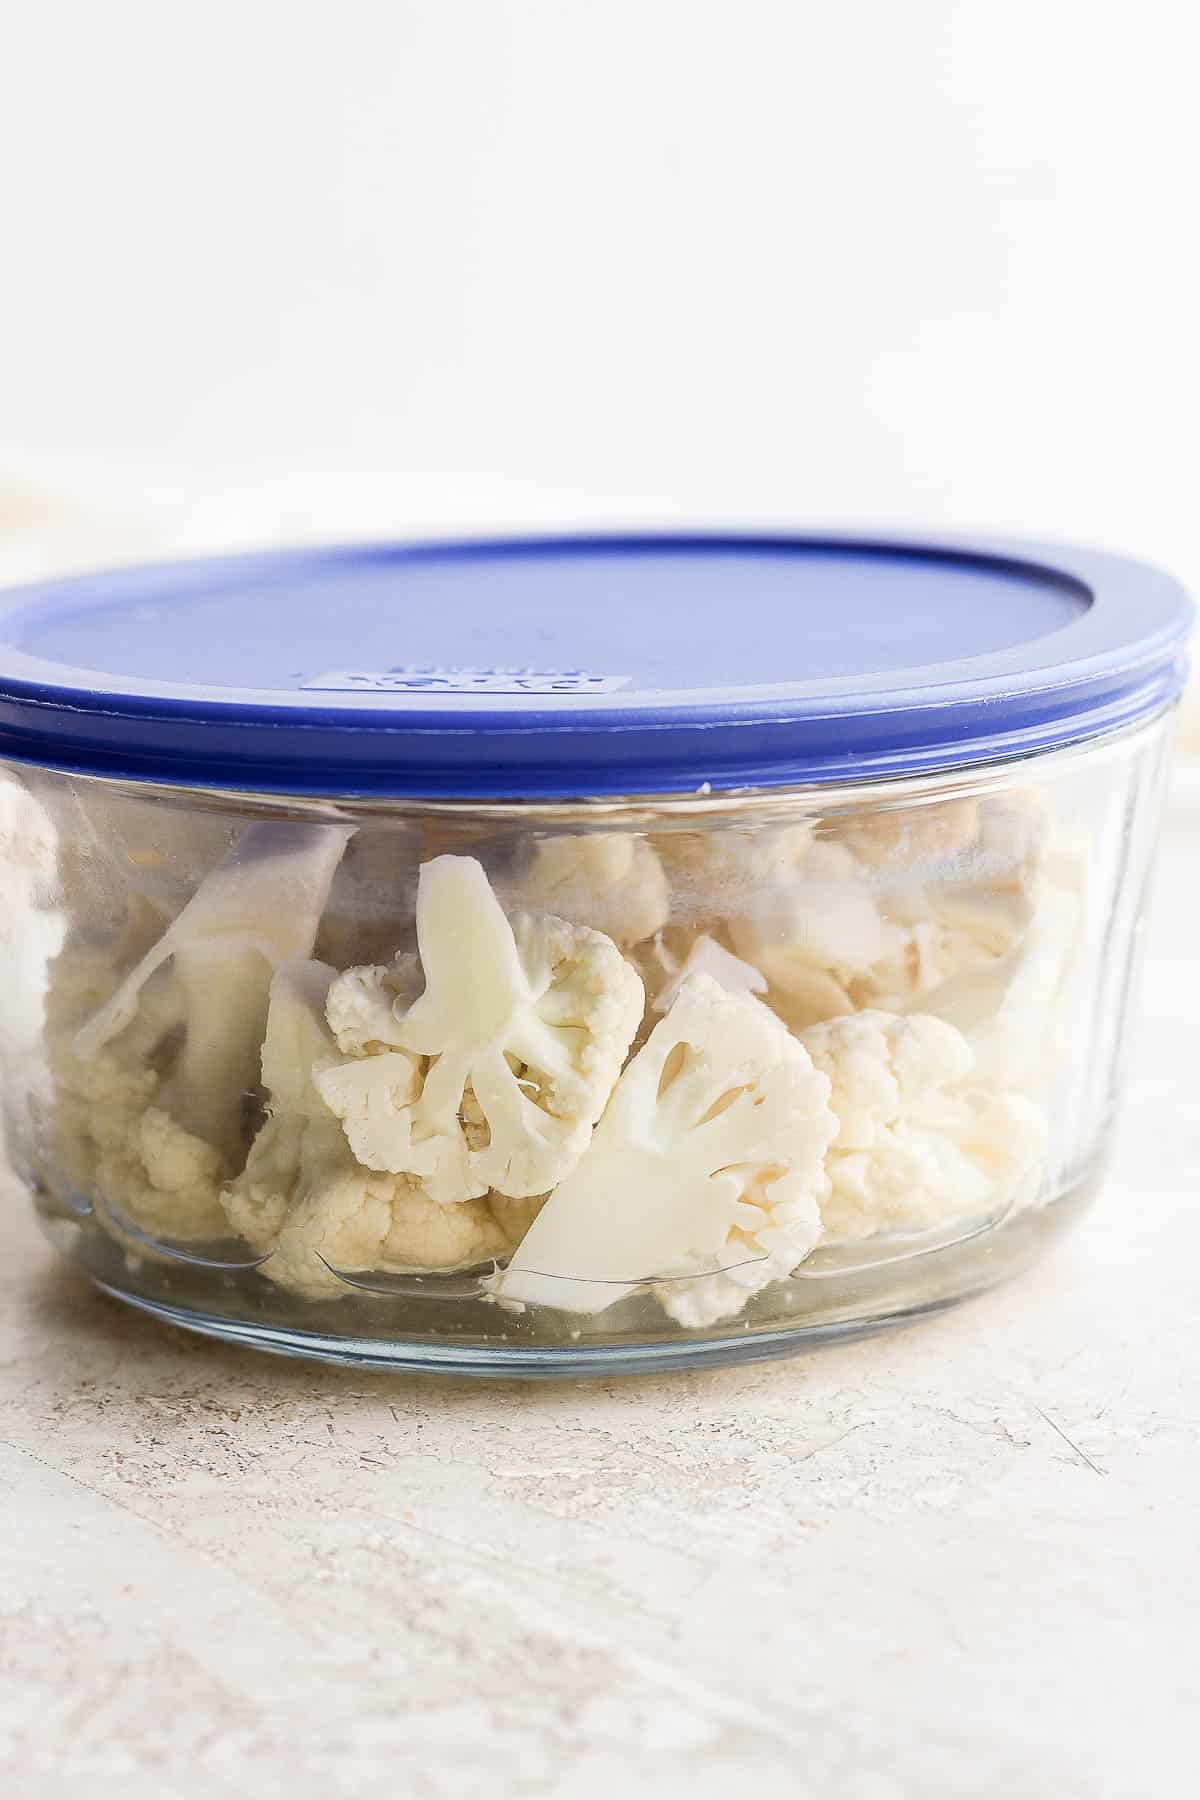 Cauliflower florets steaming in a microwave safe container.